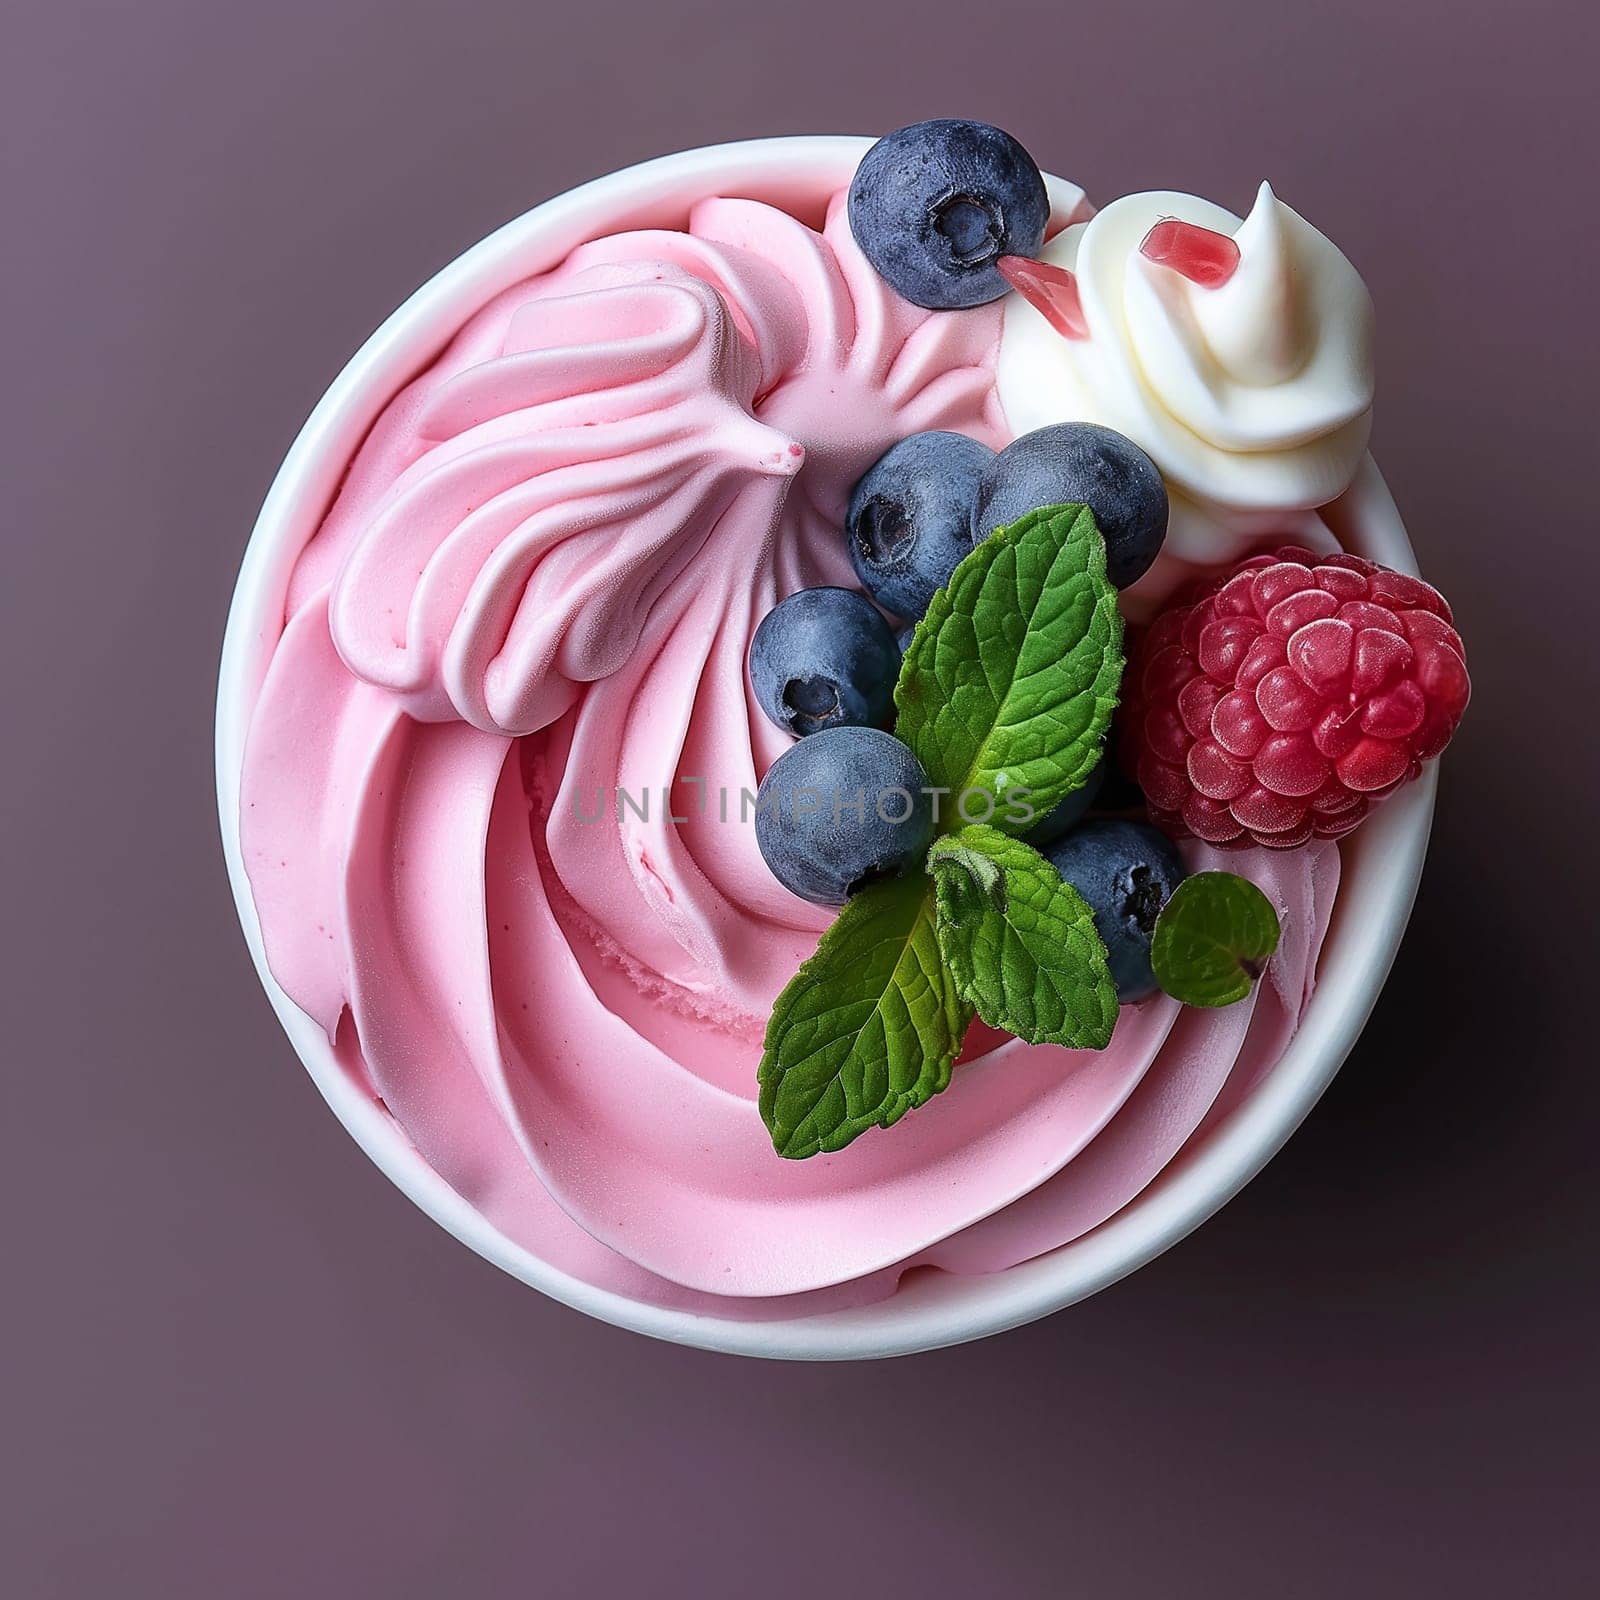 Soft, swirled pink and white frozen yogurt or ice cream topped with fresh berries and mint. by Hype2art